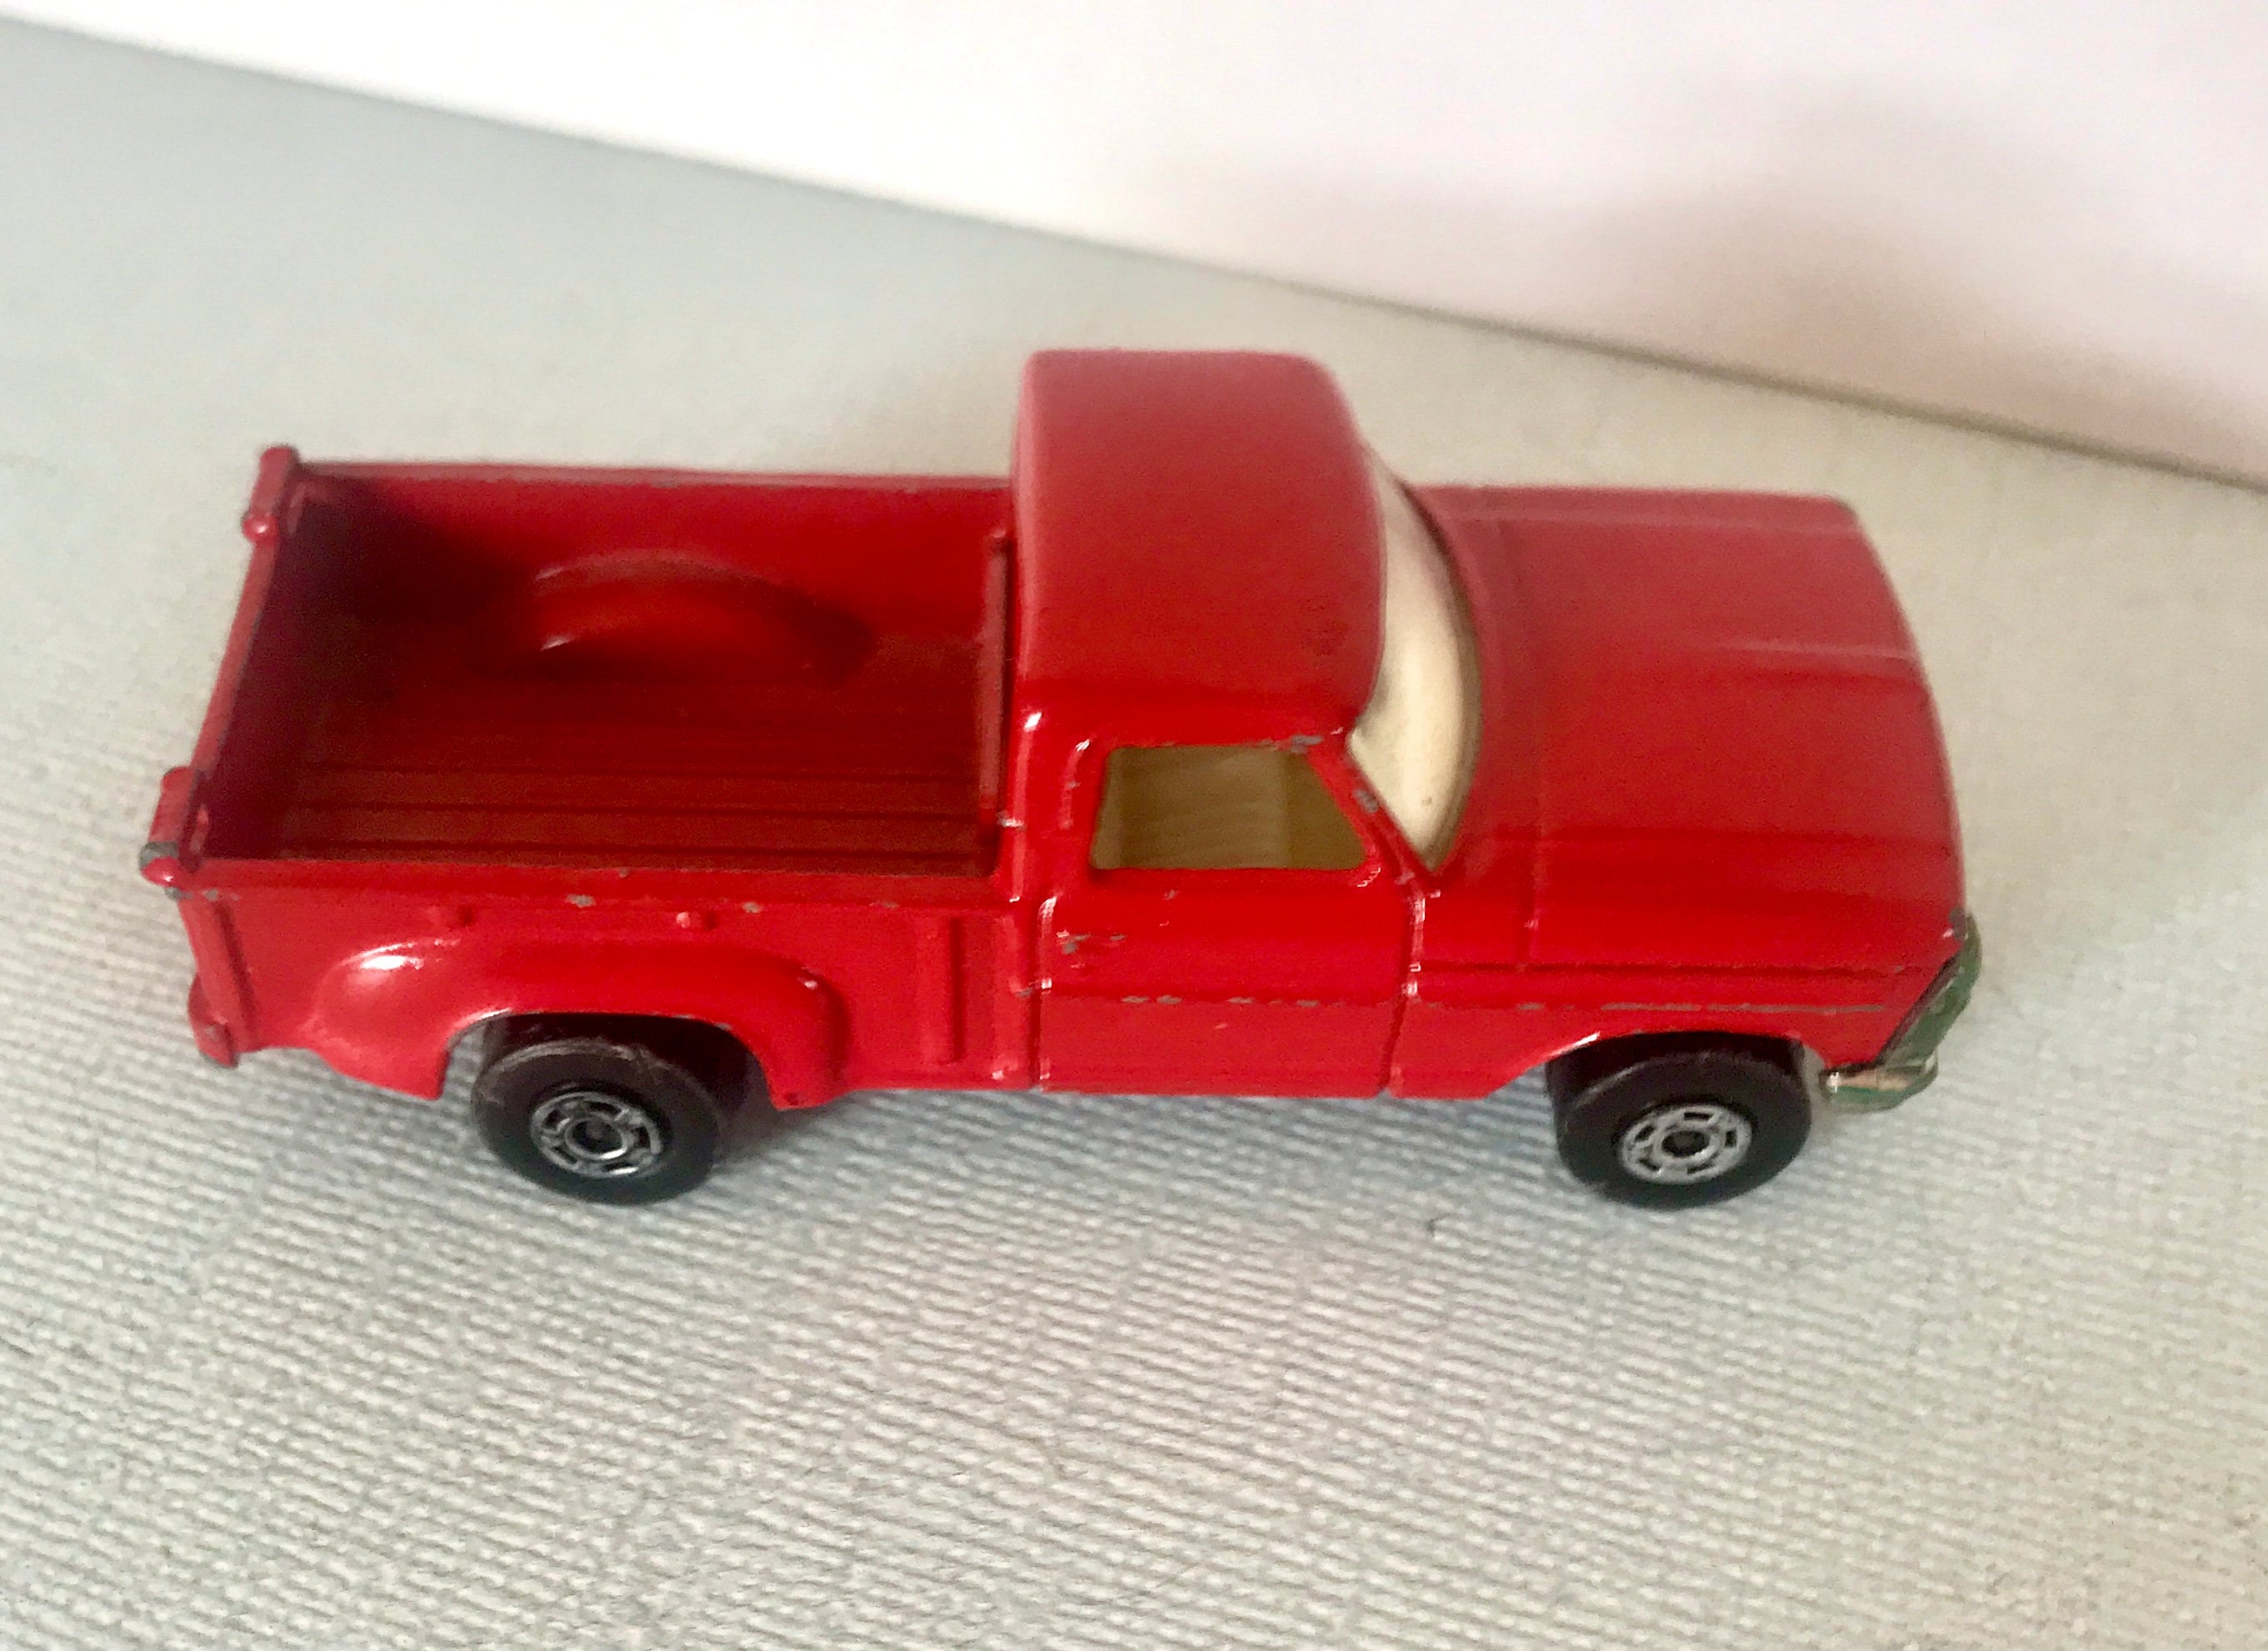 Matchbox Series 6 Ford Pickup Cockpit Made IN England, 1967 Ovp